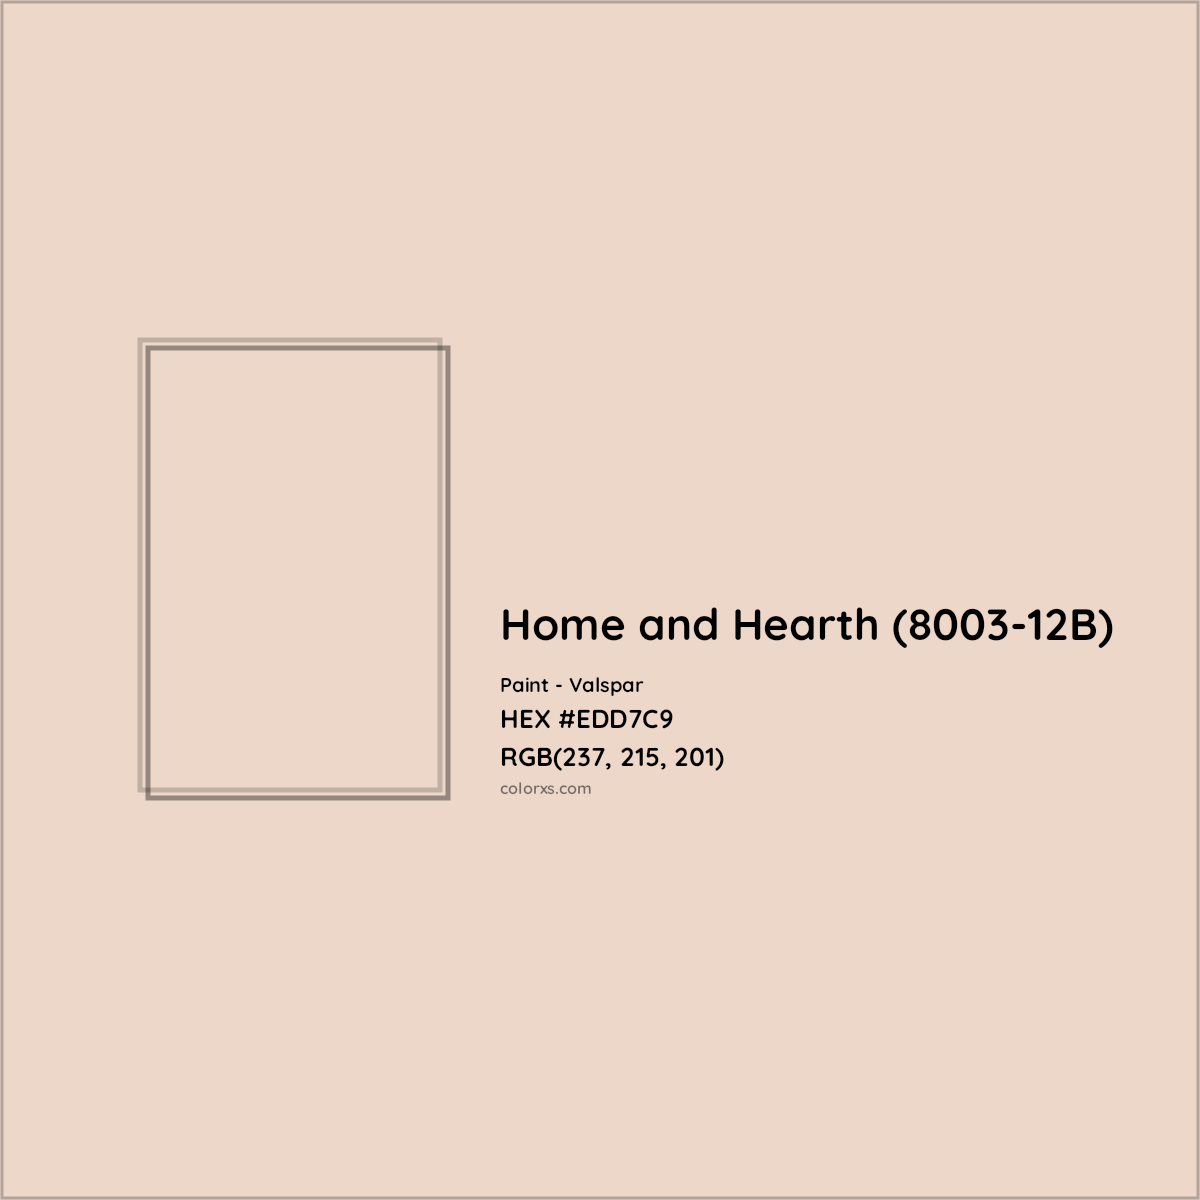 HEX #EDD7C9 Home and Hearth (8003-12B) Paint Valspar - Color Code